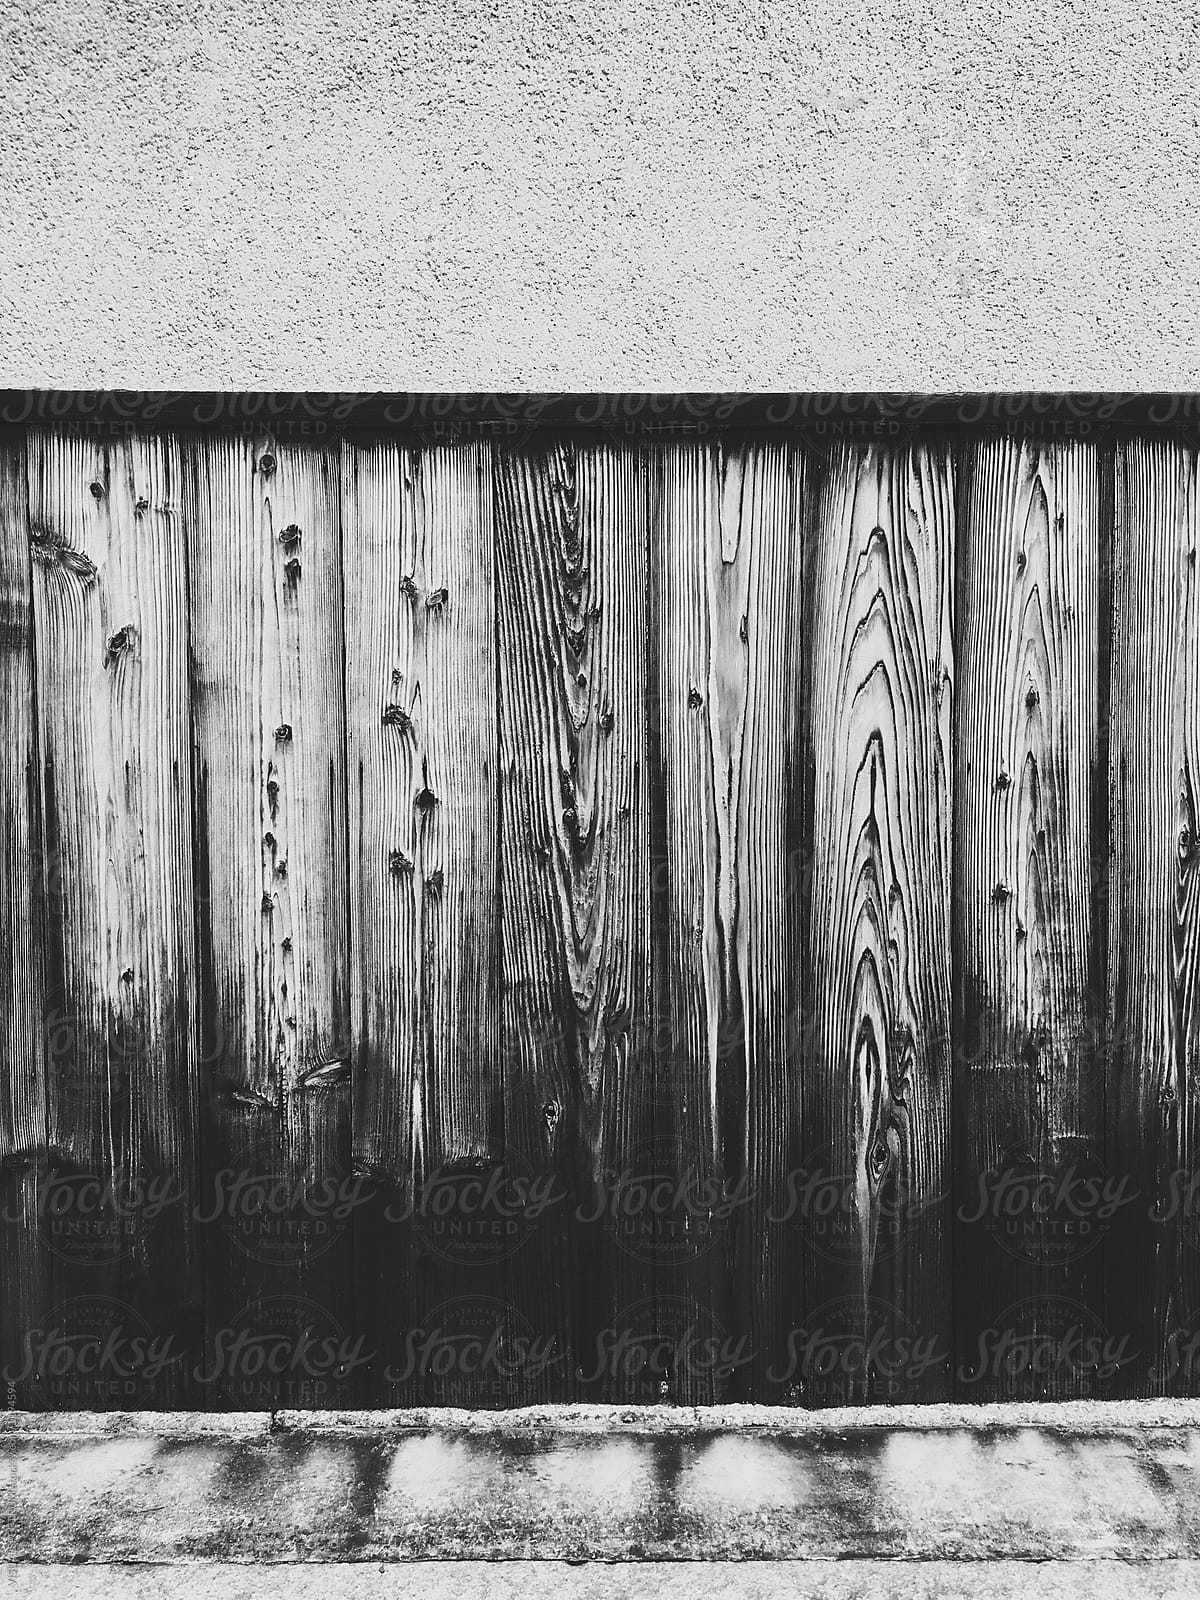 Weathered Wood on Japanese House Exterior in Black and White